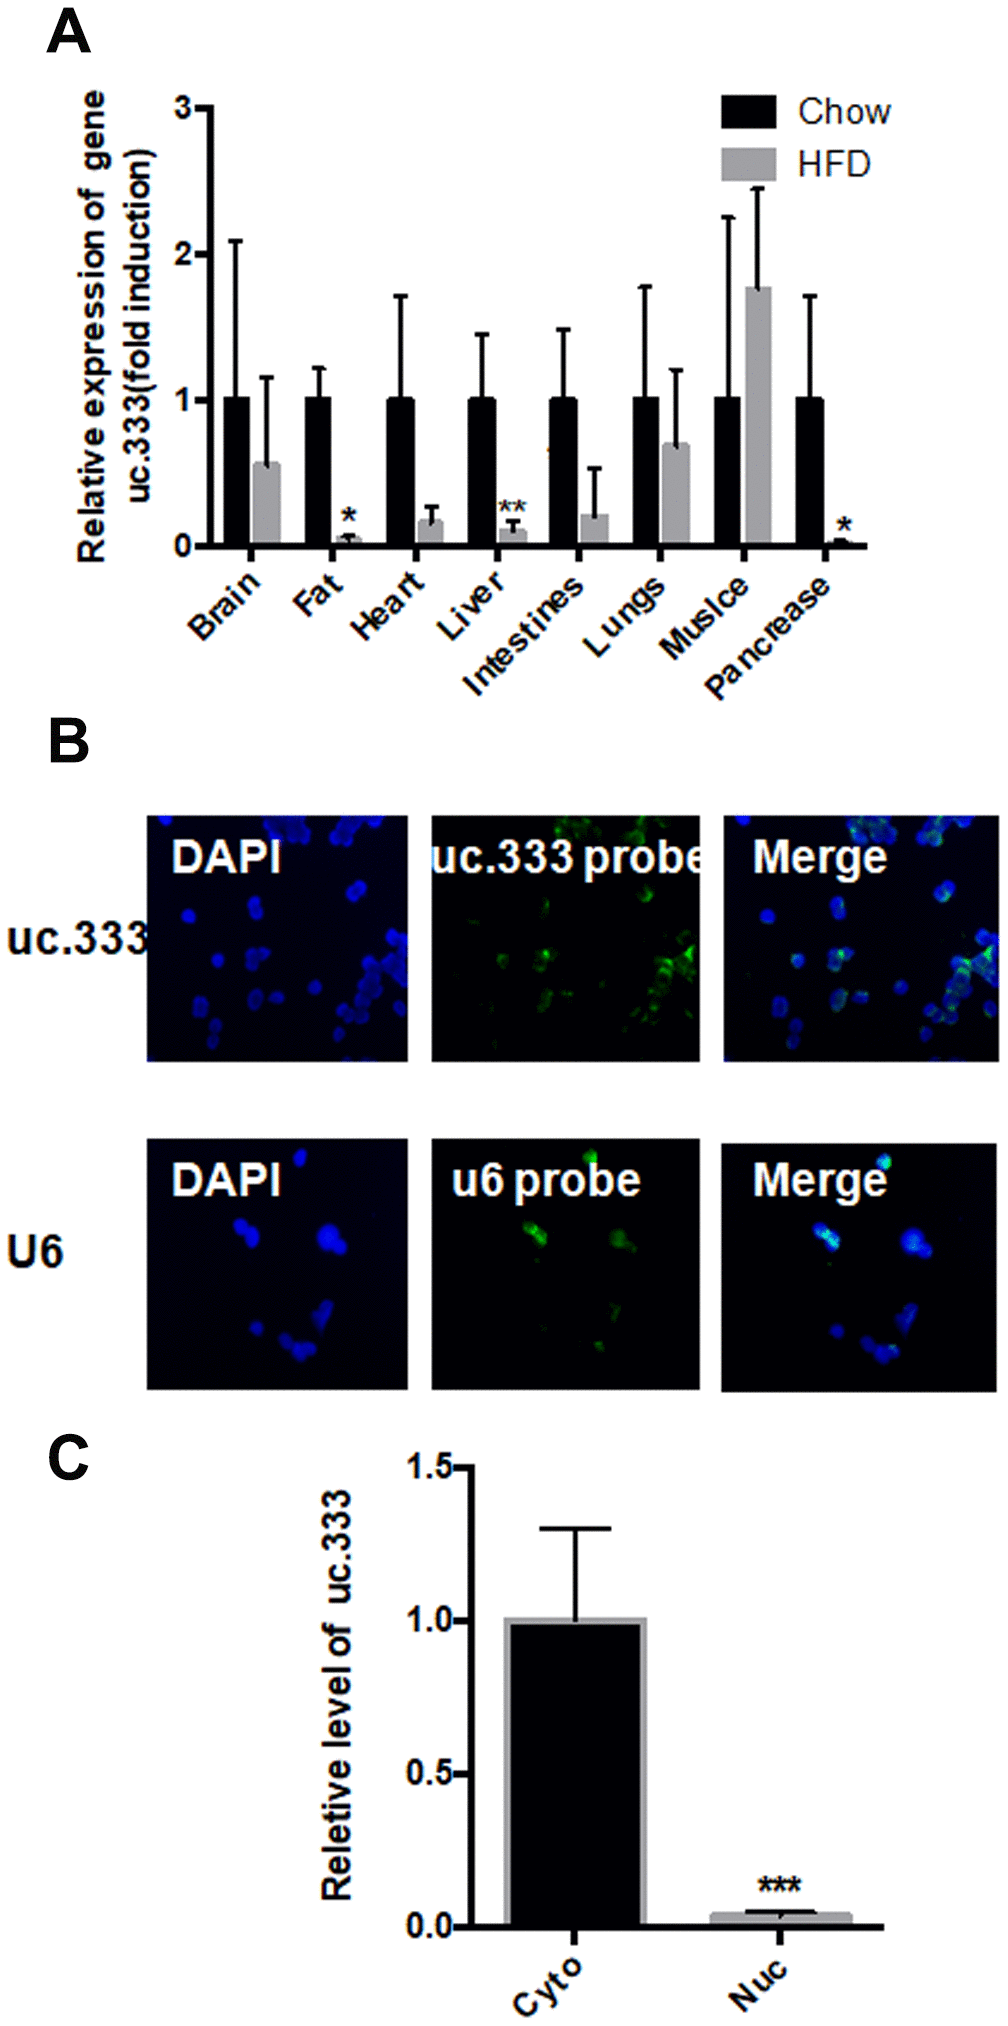 Distribution of uc.333 in various tissues and in hepatocytes. (A) Distribution of uc.333 in various tissues of HFD-fed mice (n = 5). (B) Representative images of FISH detecting endogenous lncRNA uc.333 molecules (green) in HepG2 cells. Nucleus (blue) was stained with DAPI. Scale bar, 25 μm. (C) Cellular fractionation assay in HepG2 was performed using quantitative real-time PCR using a specific cytosol control (tubulin) and a specific nuclear control (gene histone). Data are mean ± SEM; *P P P 